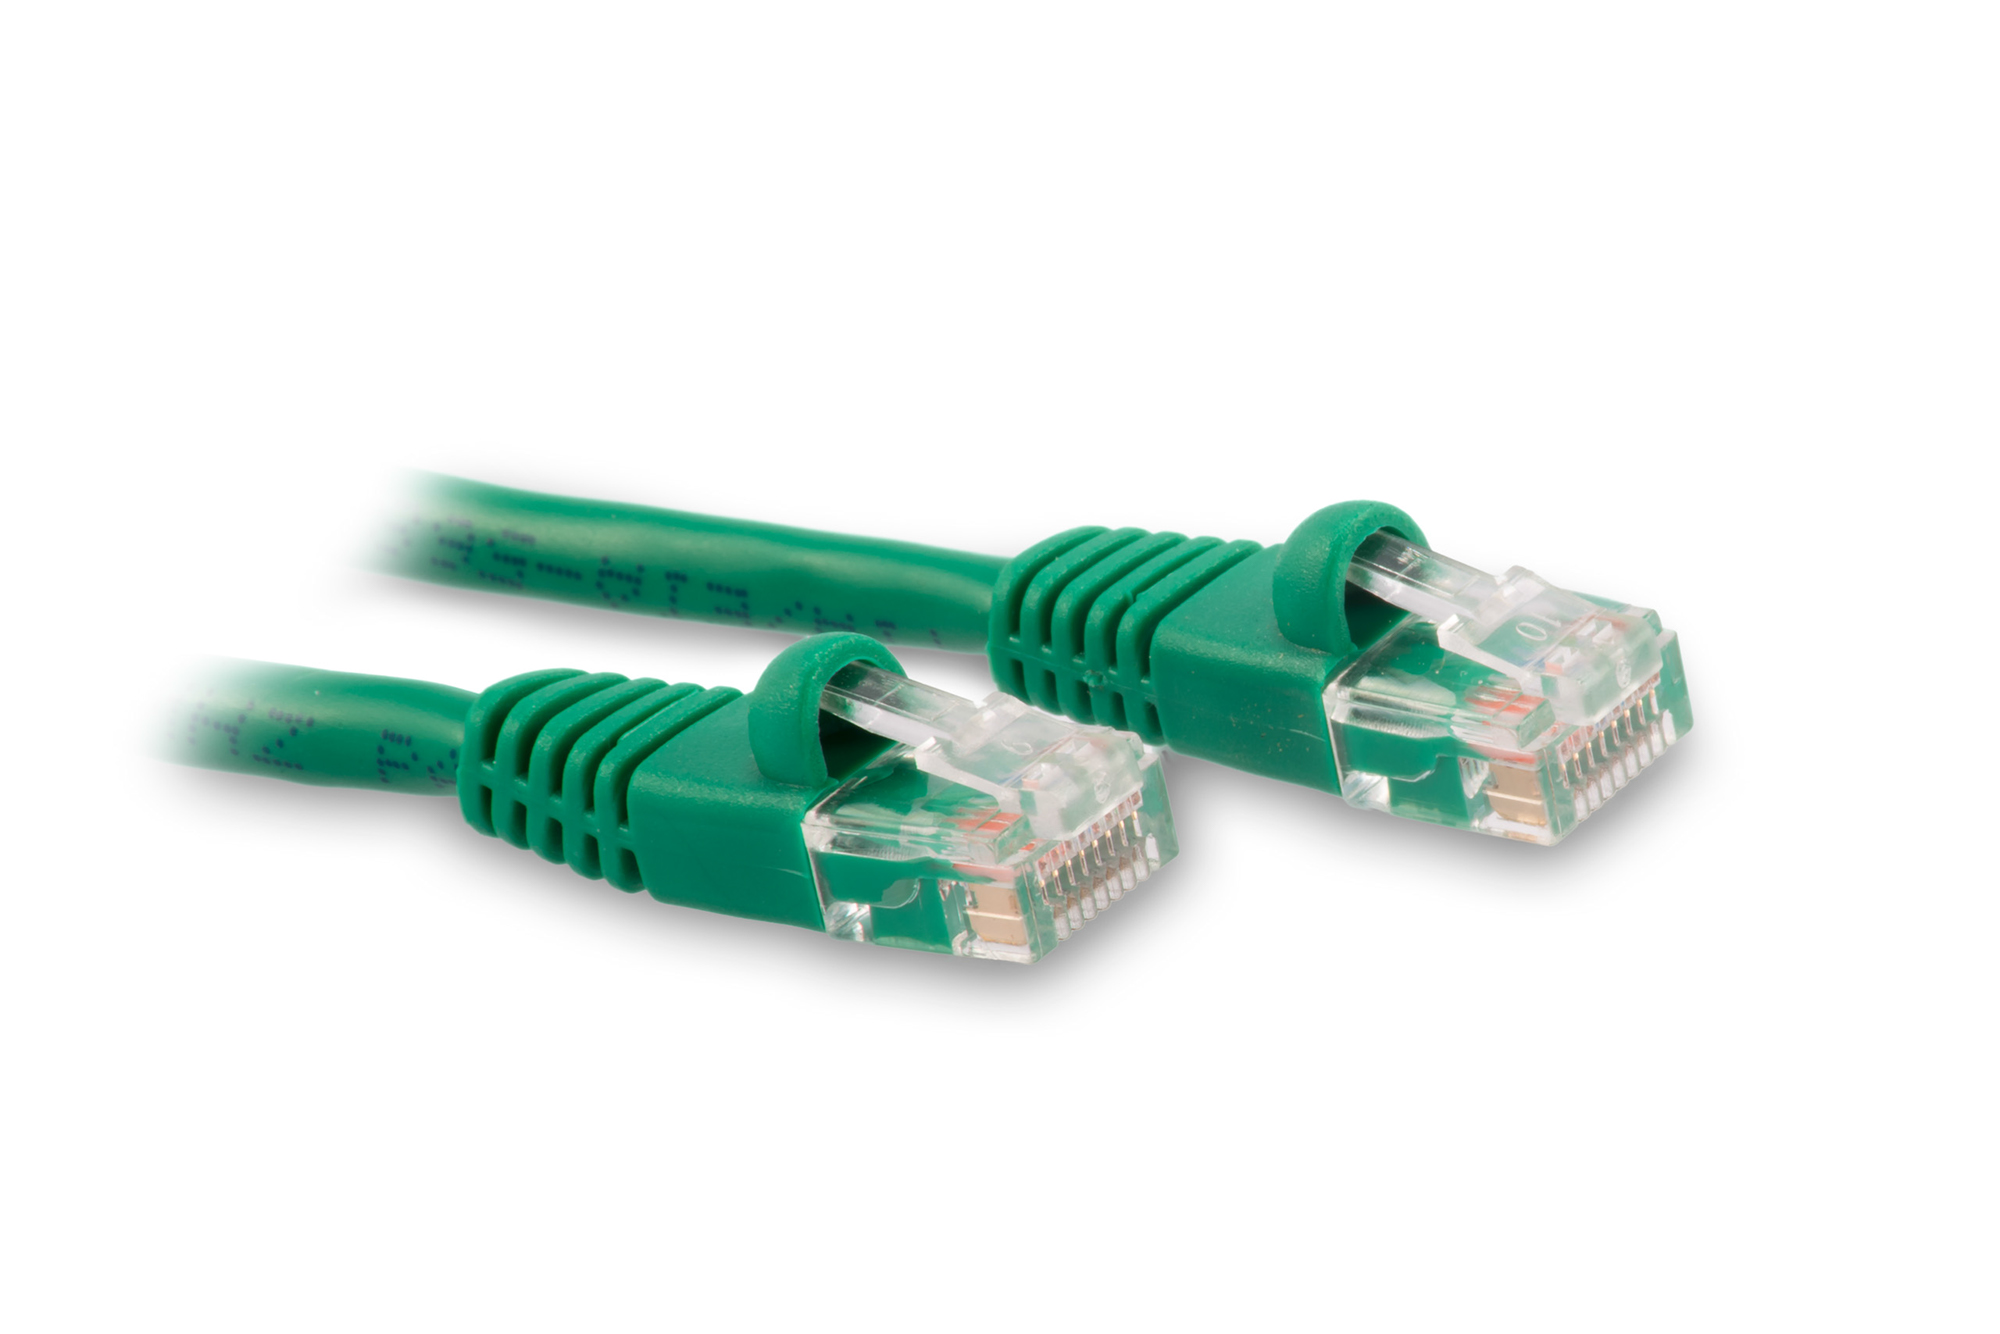 8ft Cat6 Ethernet Patch Cable - Green Color - Snagless Boot